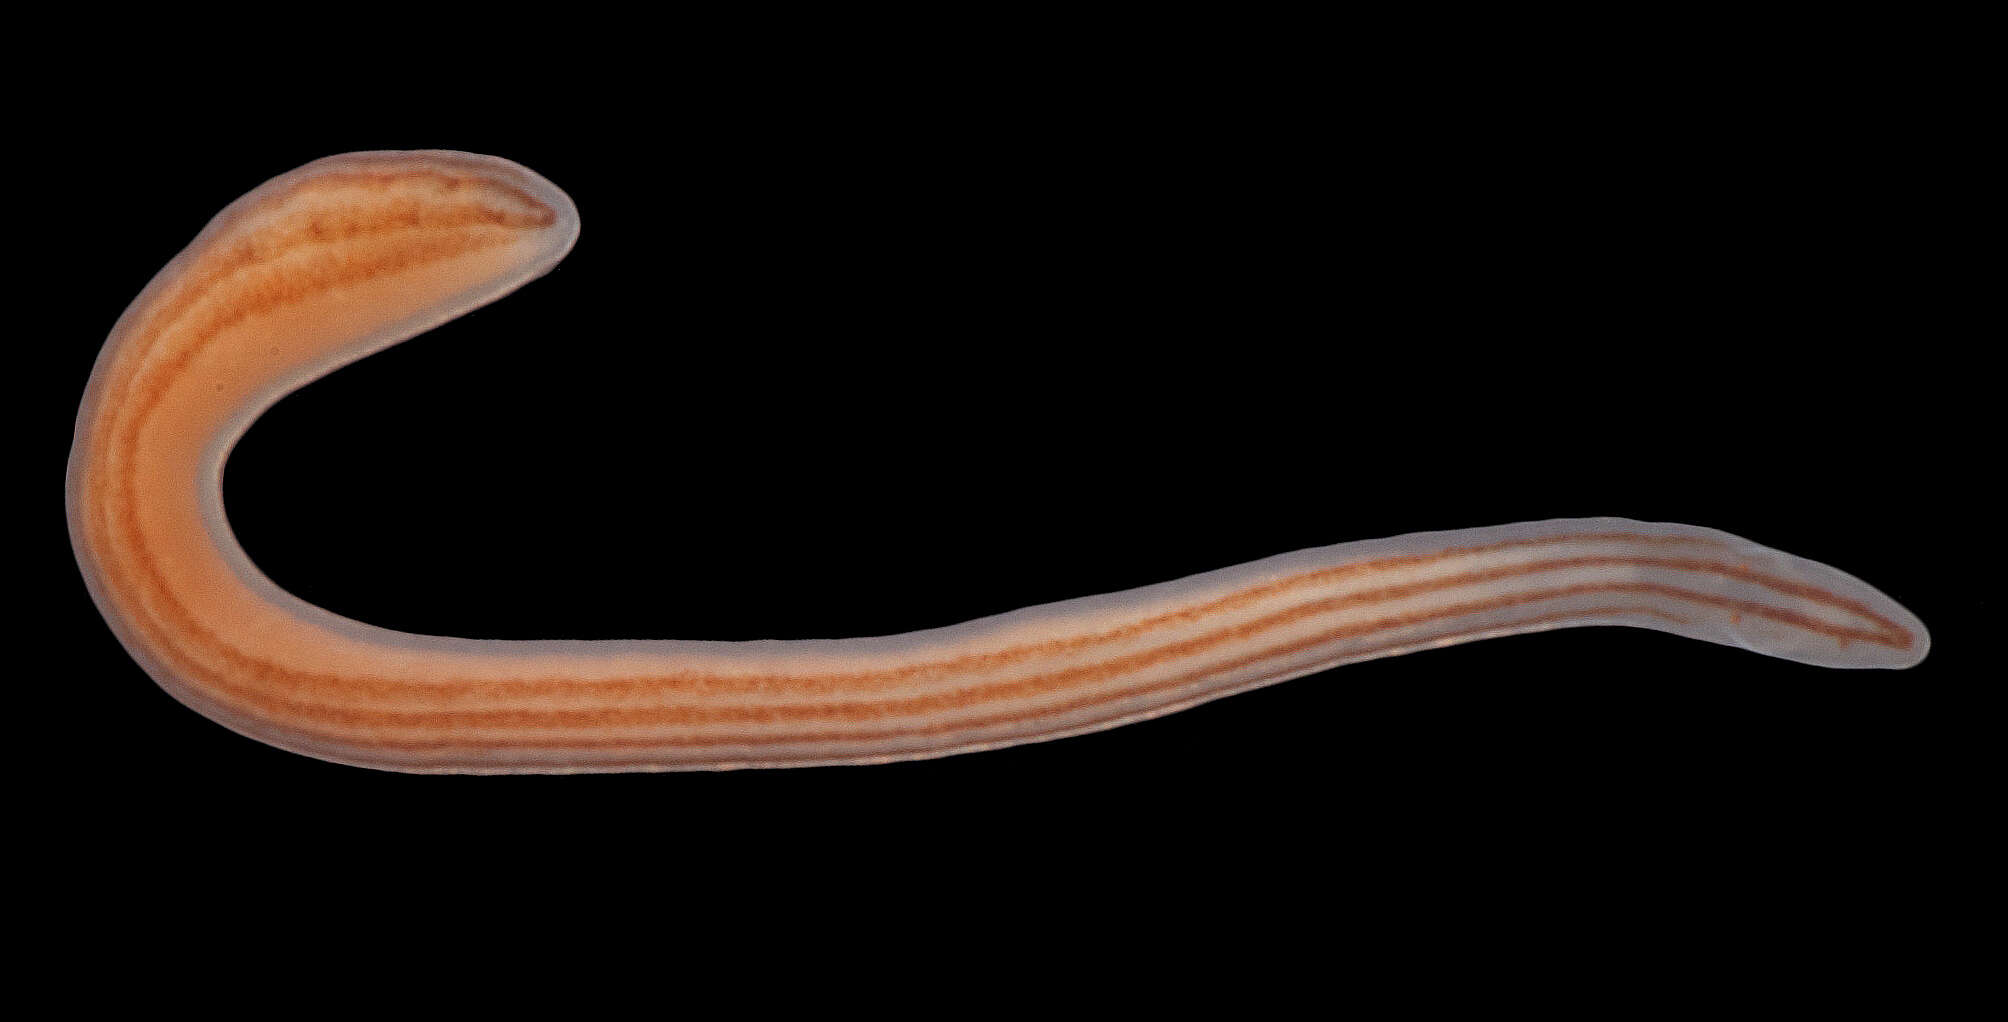 Image of ribbon worms